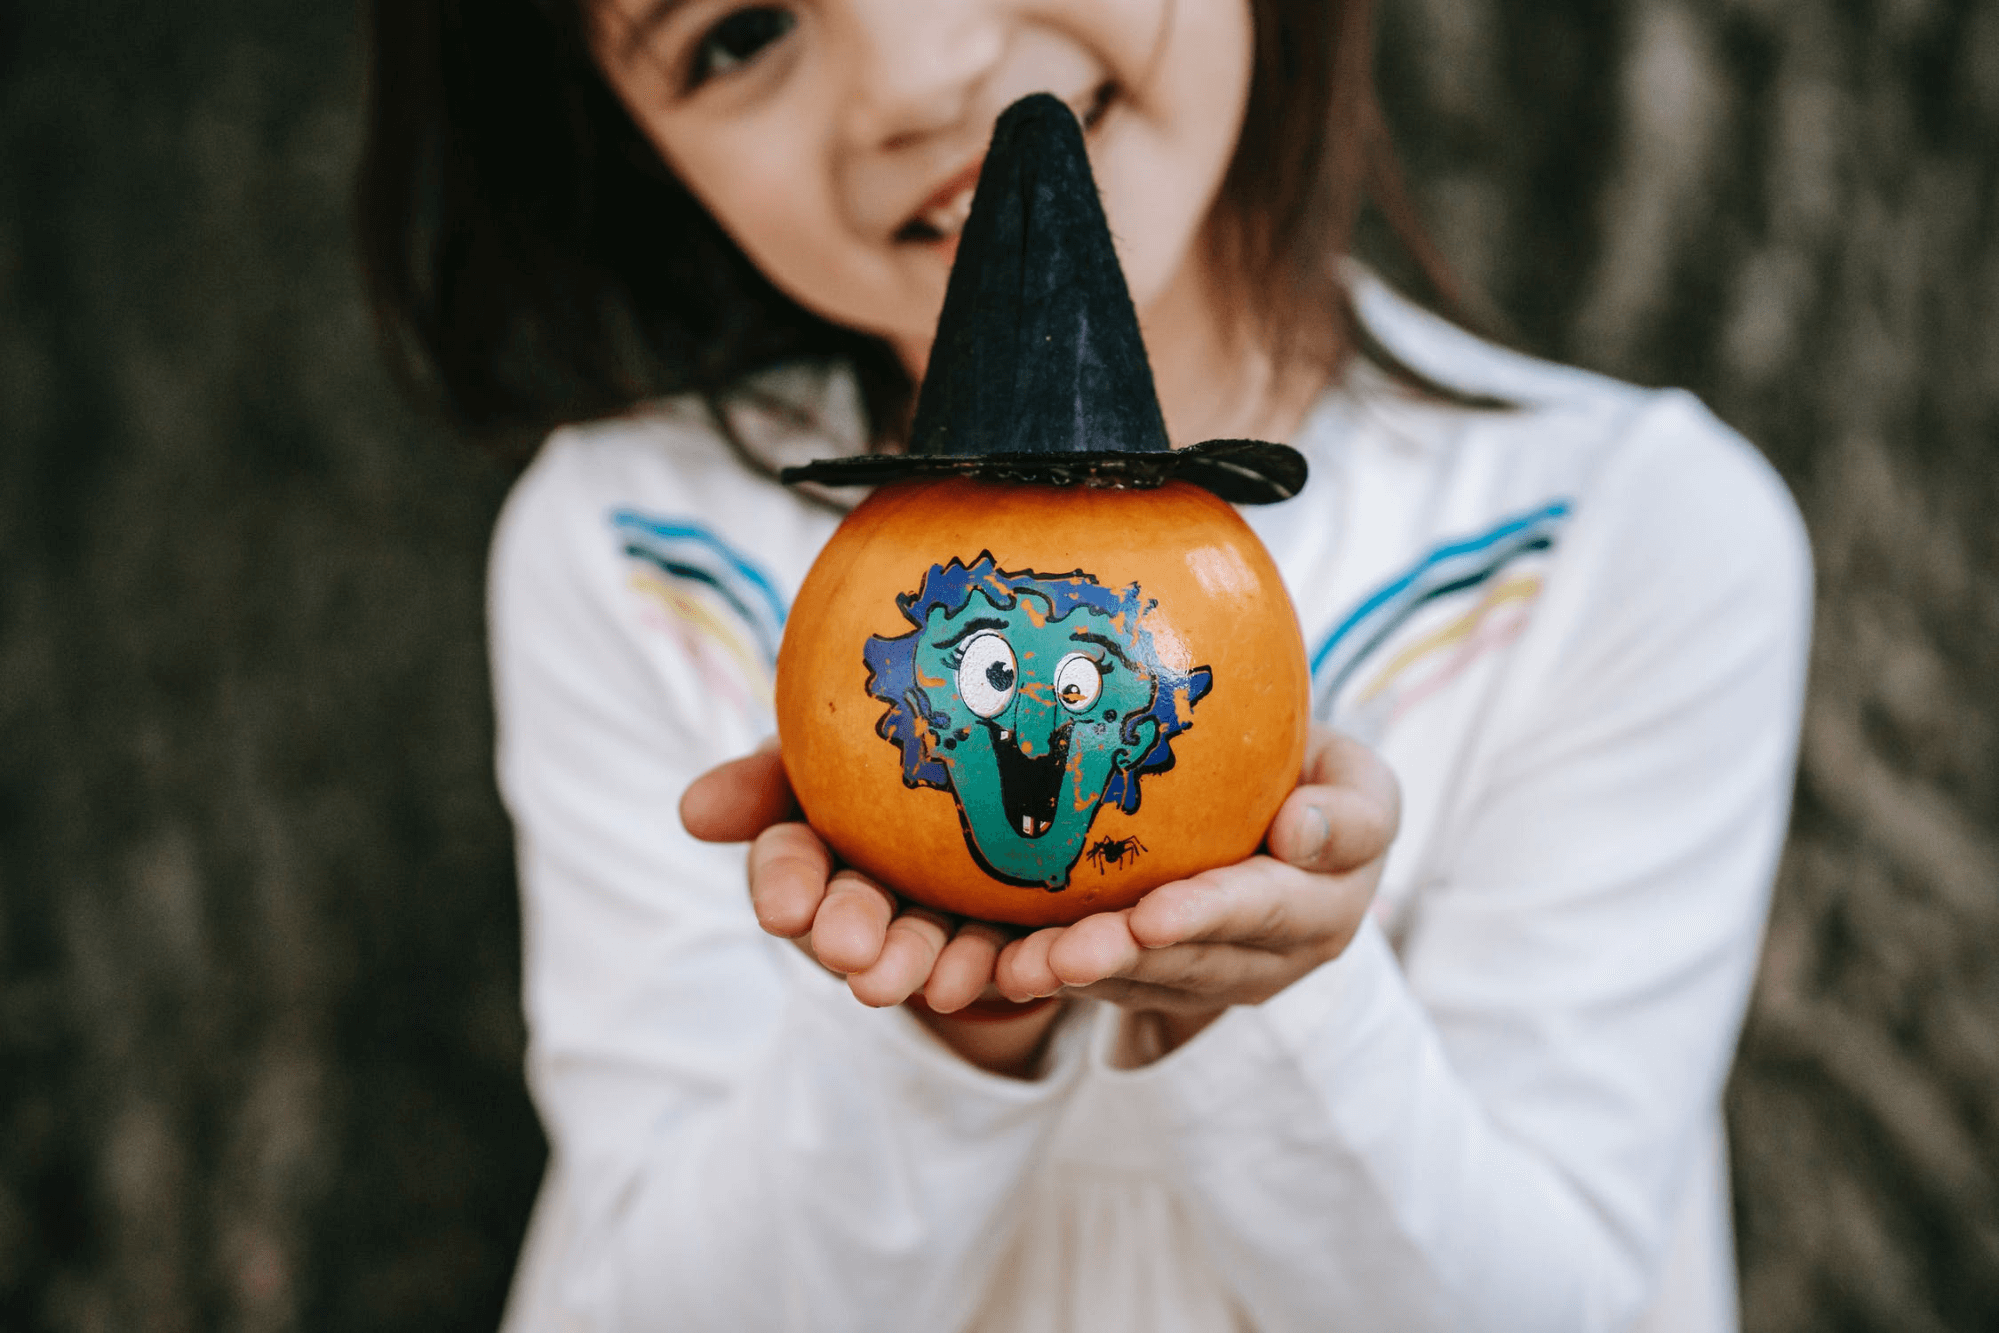 picture showing a girl offering a small painted pumpkin on Thanksgiving day